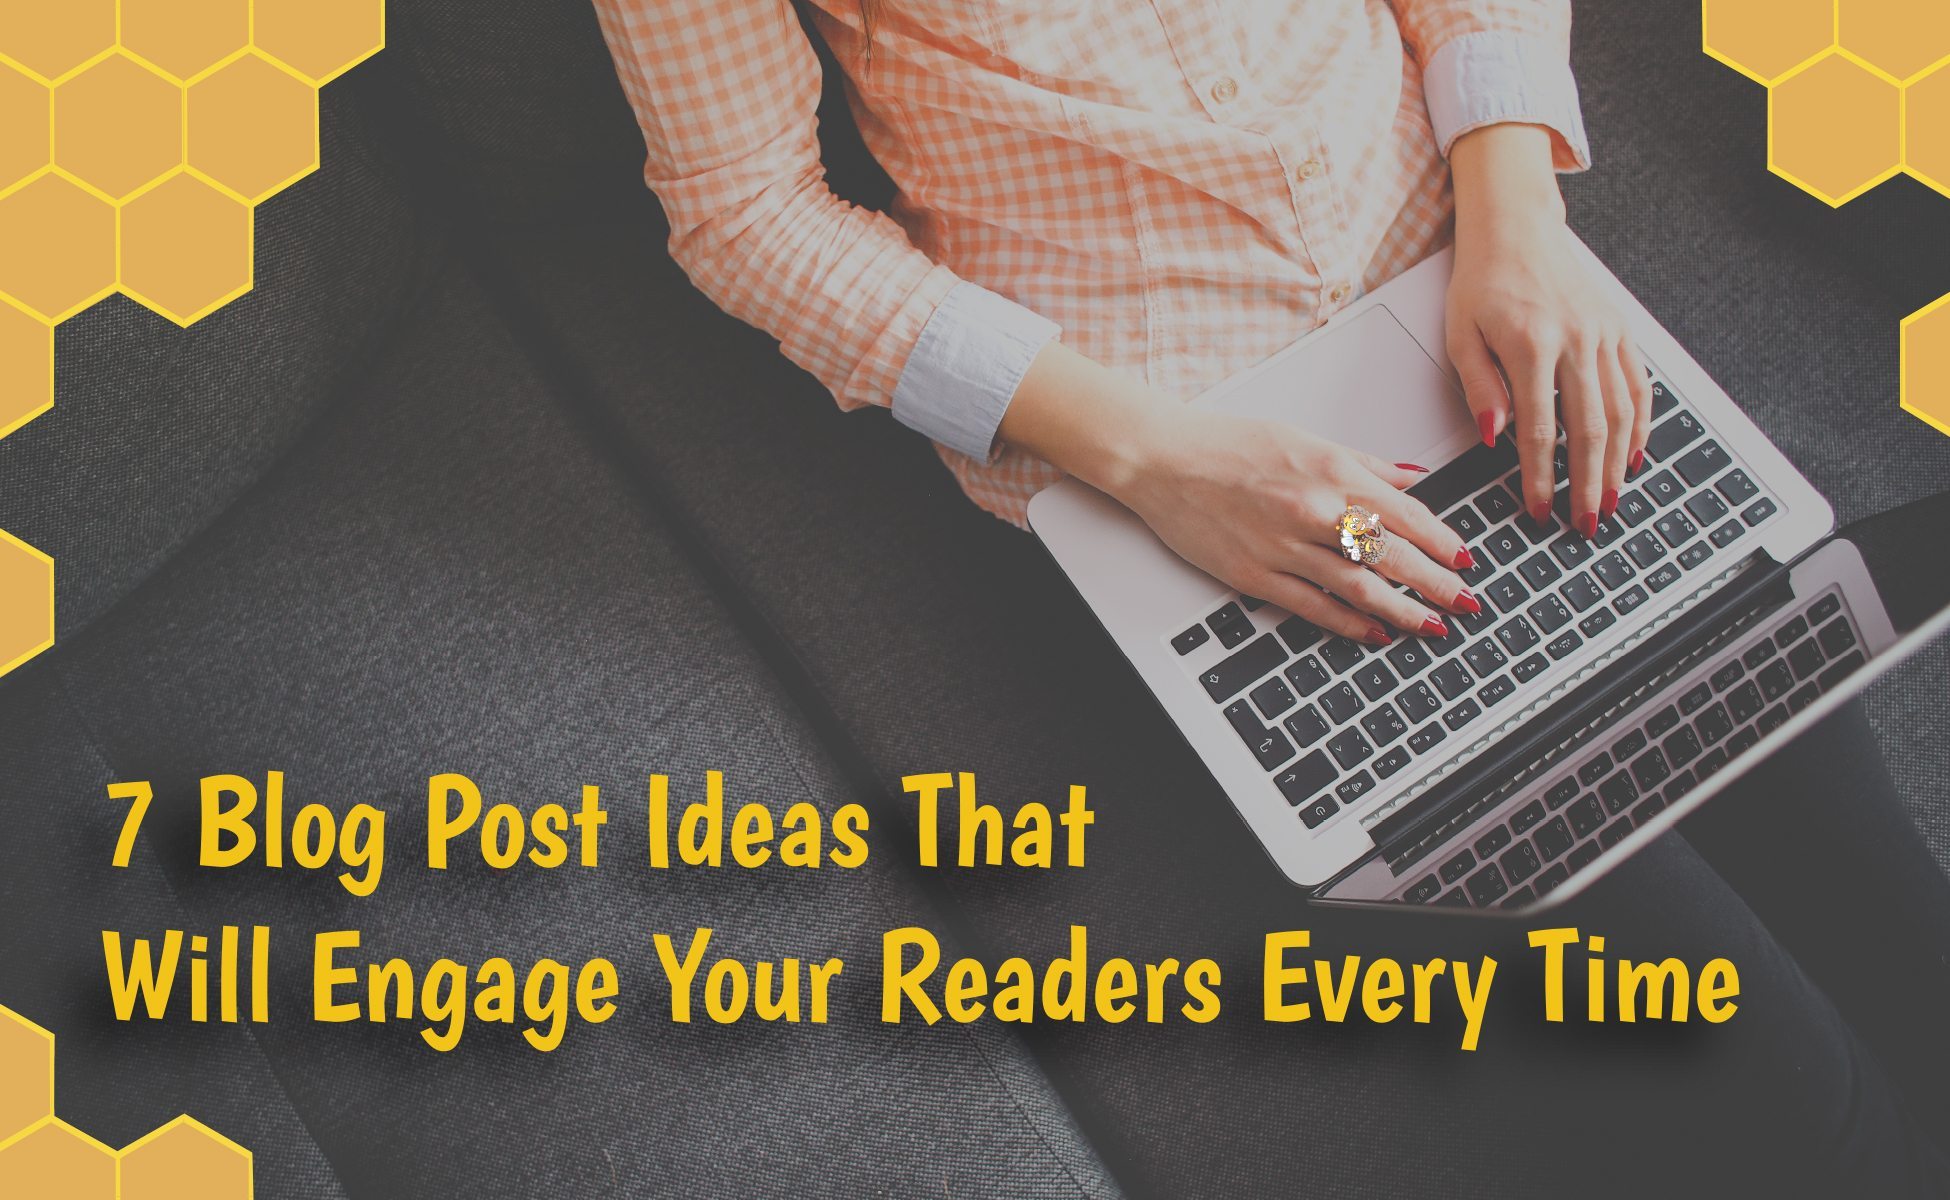 7 Blog Post Ideas That Will Engage Your Readers Every Time